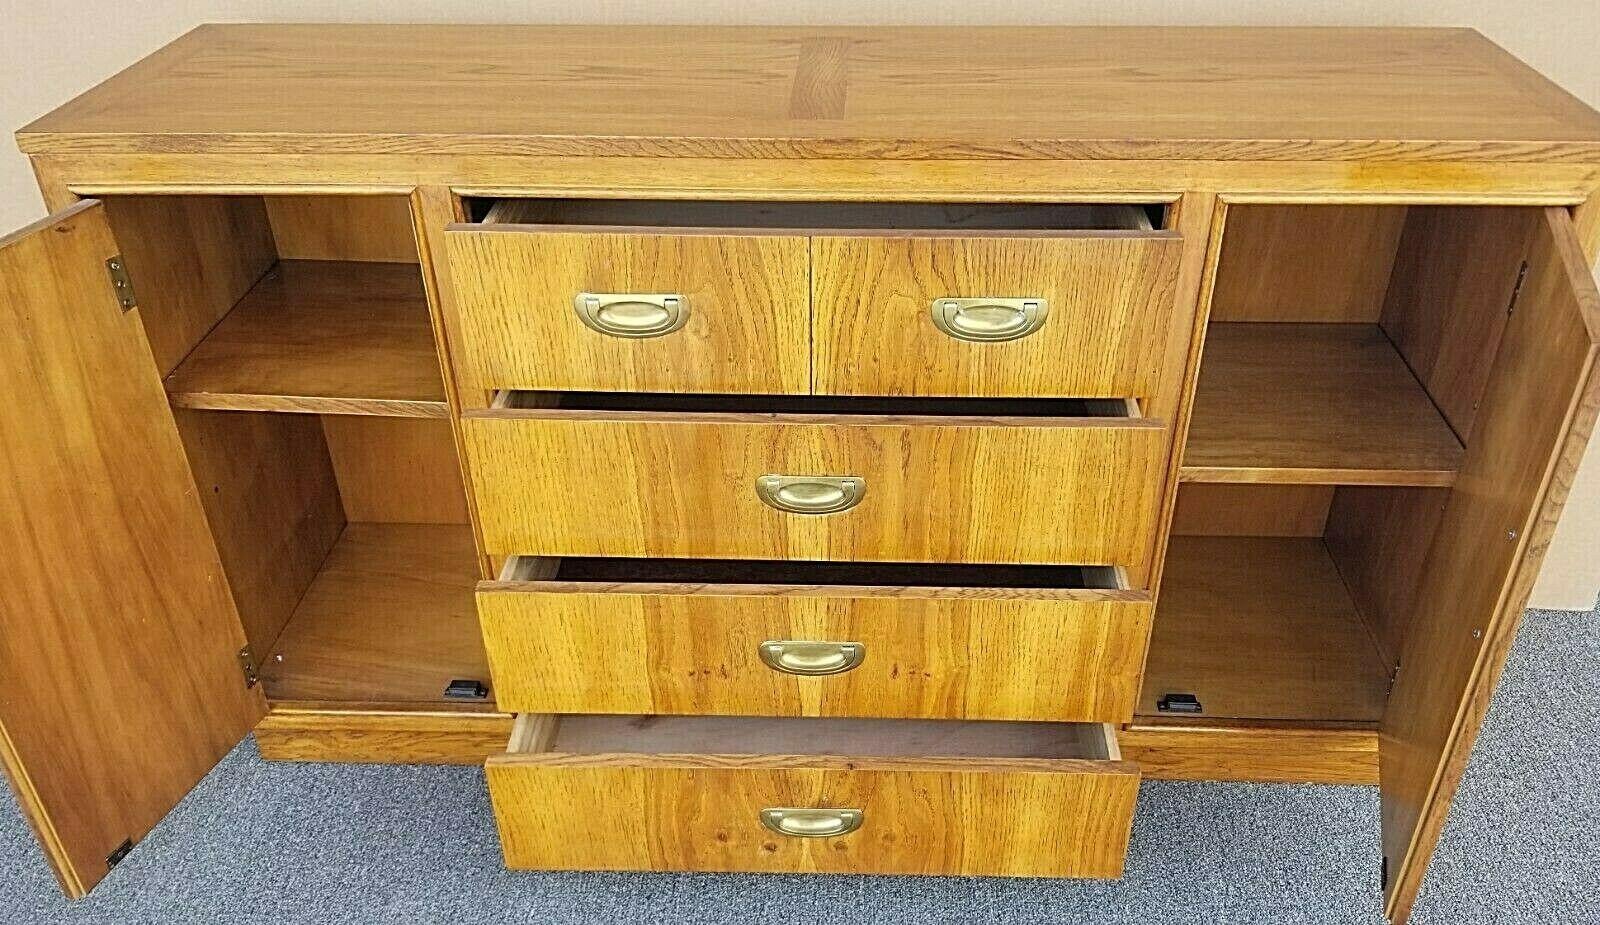 20th Century Mid-Century Modern Campaign Style Dry Bar Buffet Sideboard